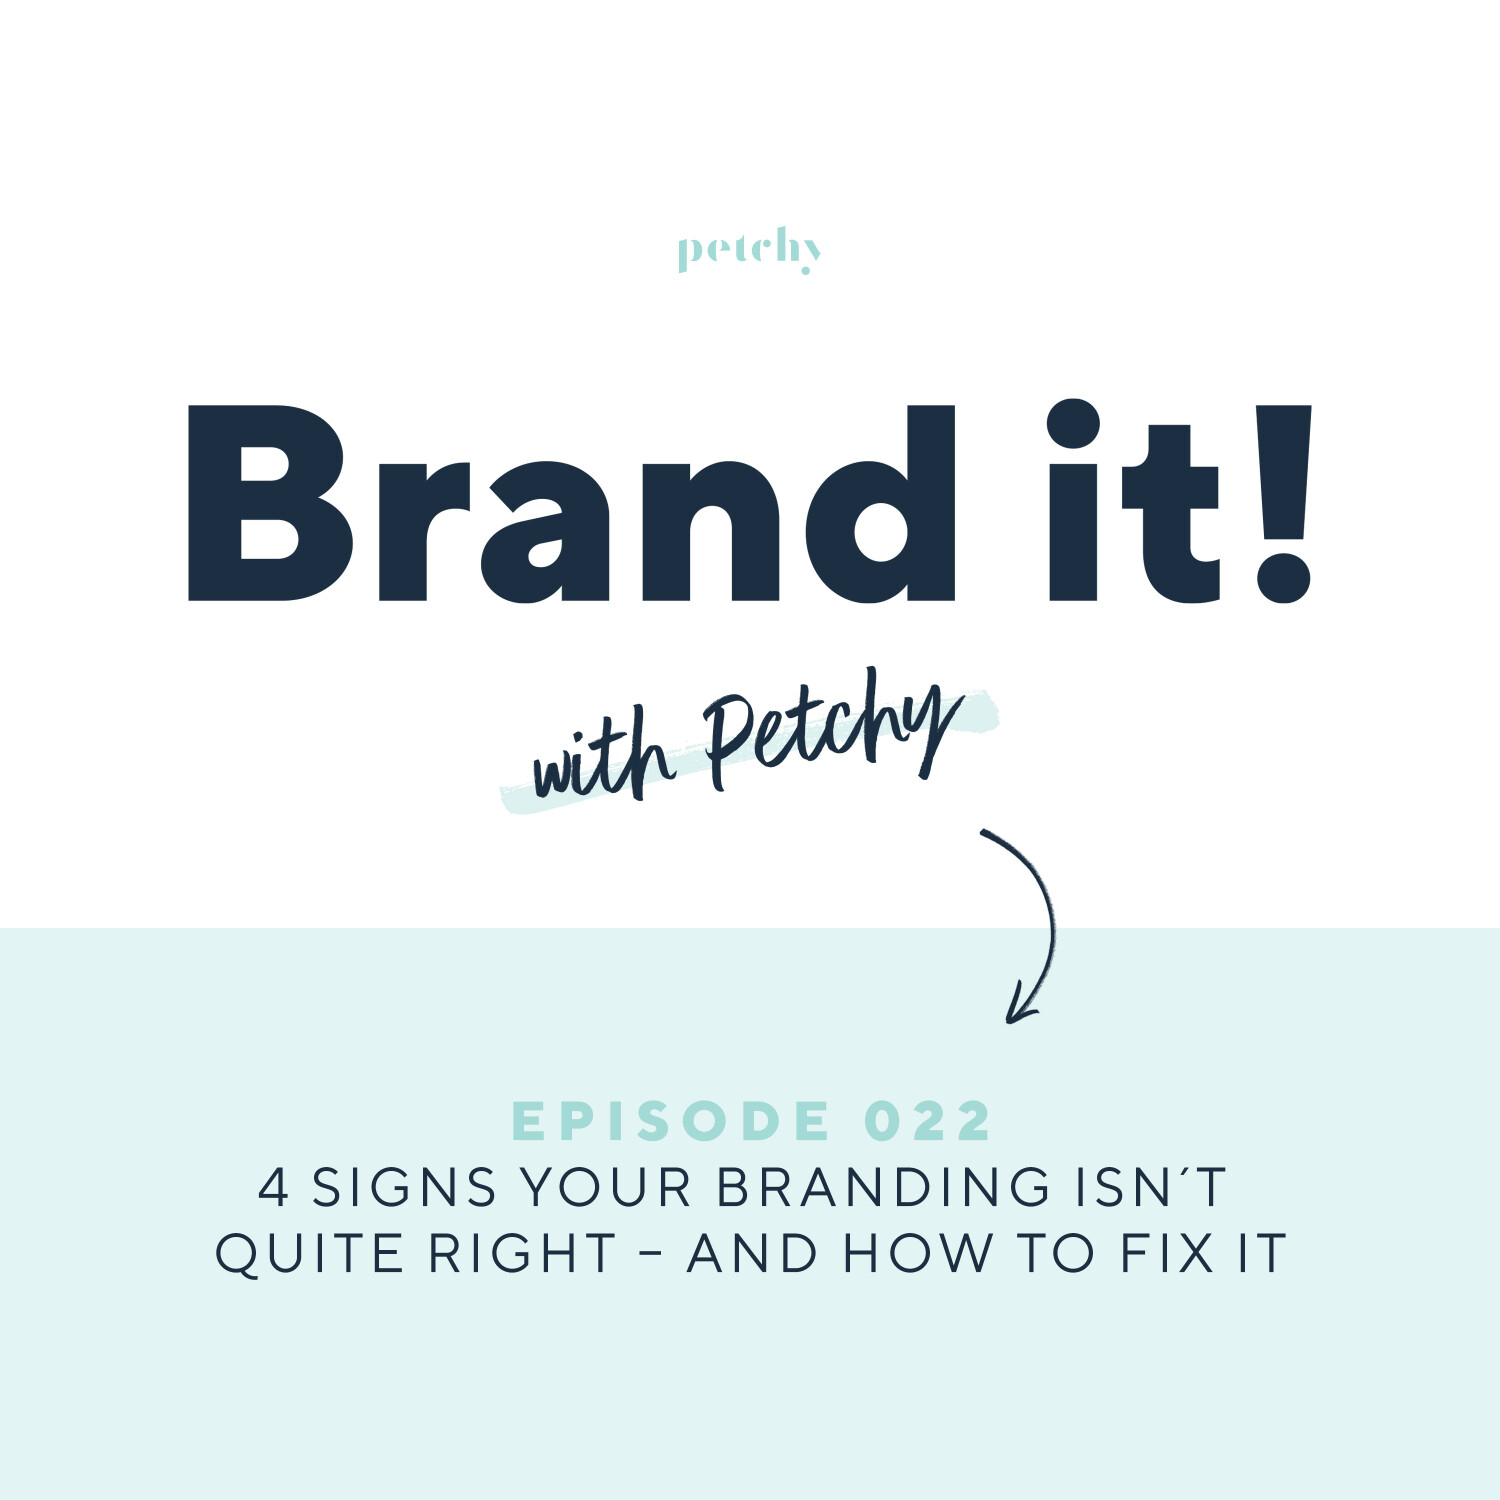 4 signs your branding isnt quite right – and how to fix it